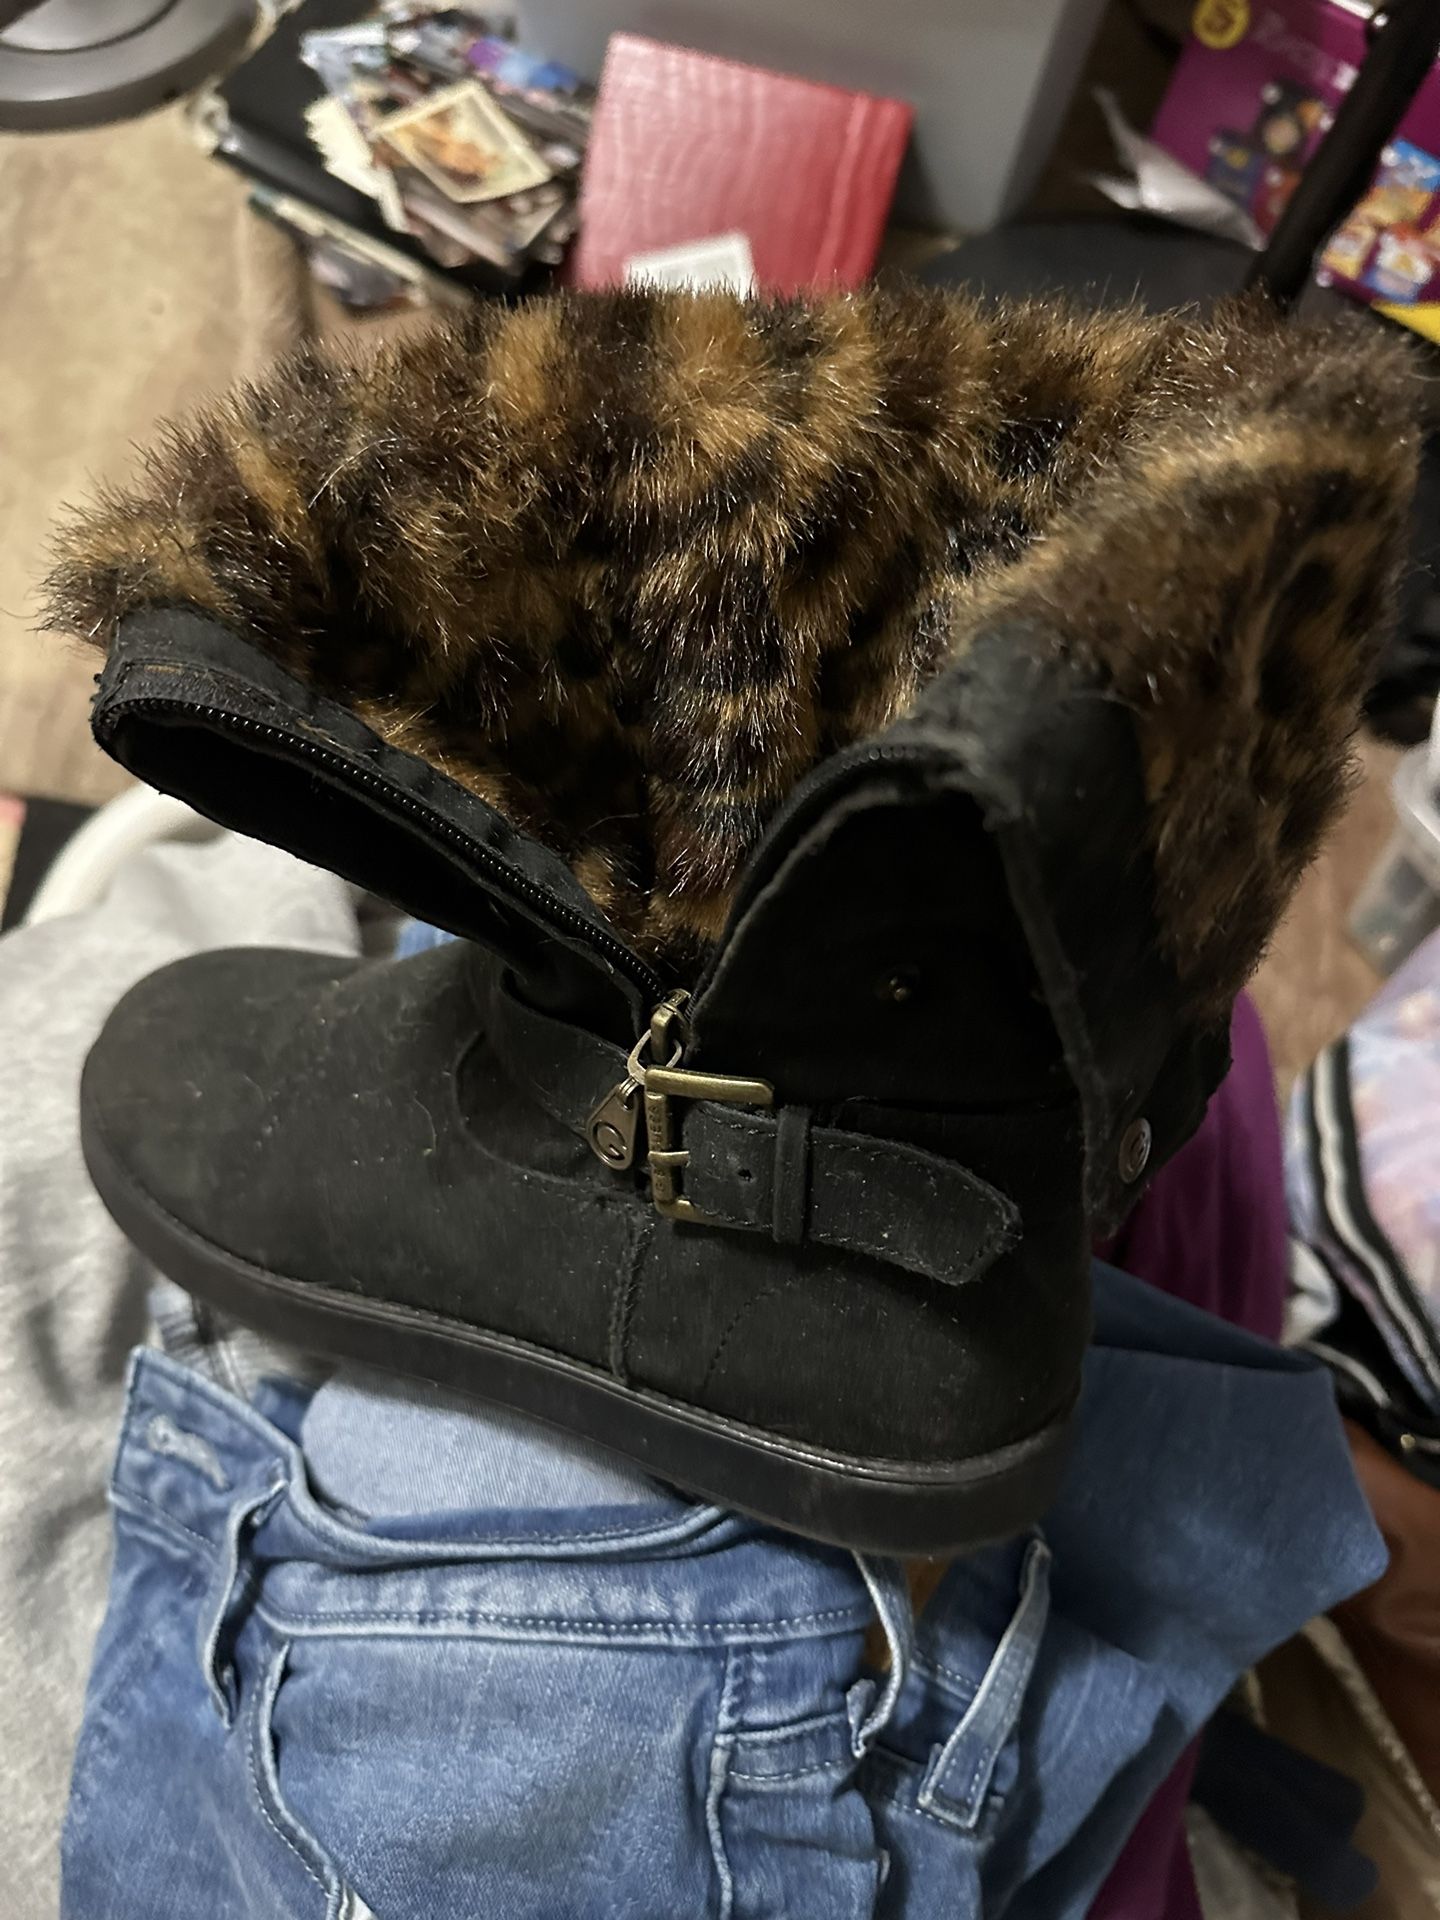 Ladies GUESS Fur Lined Boots - Excellent Near New Condition 